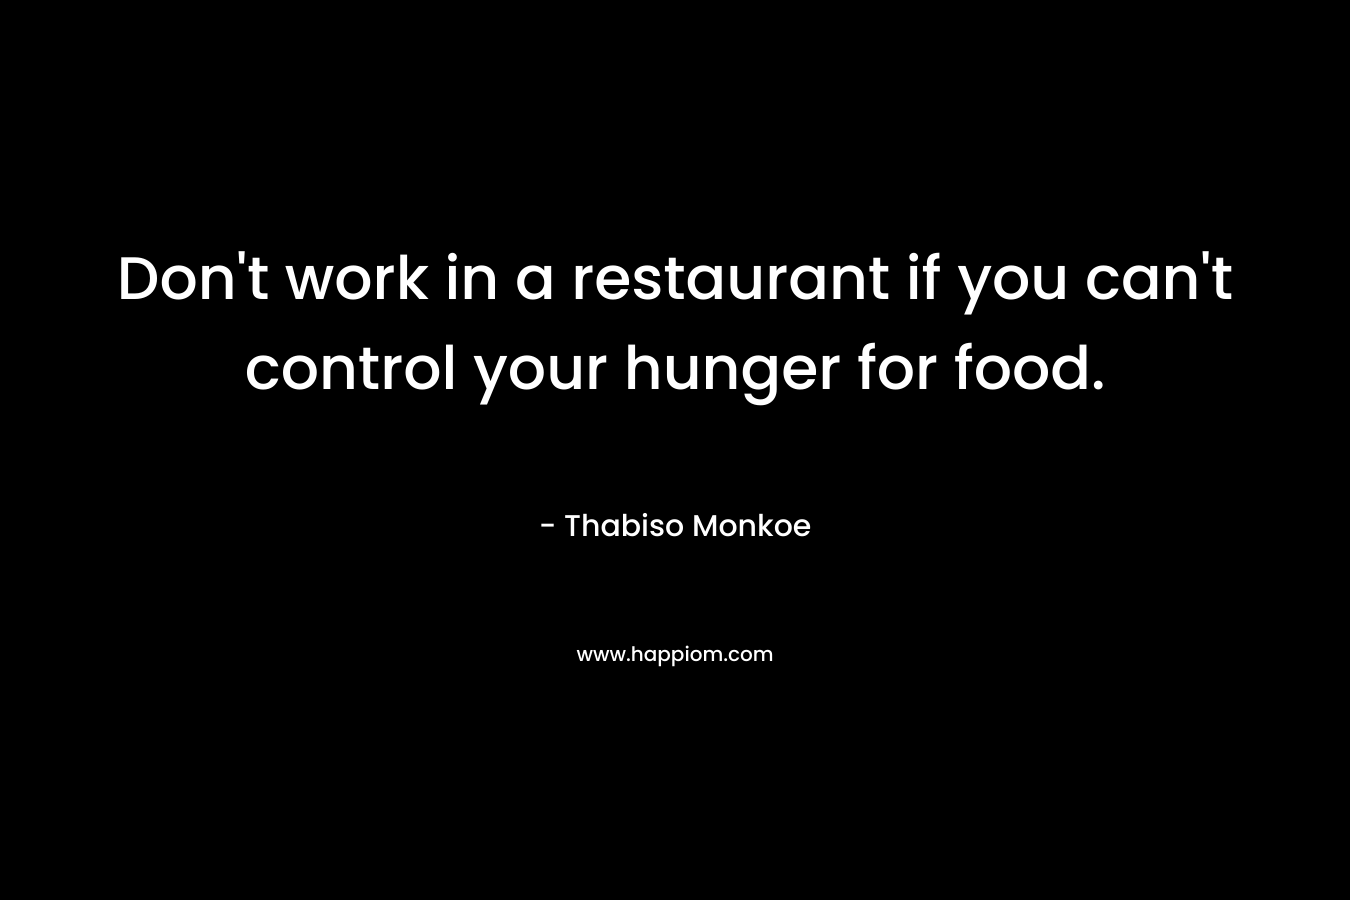 Don't work in a restaurant if you can't control your hunger for food.